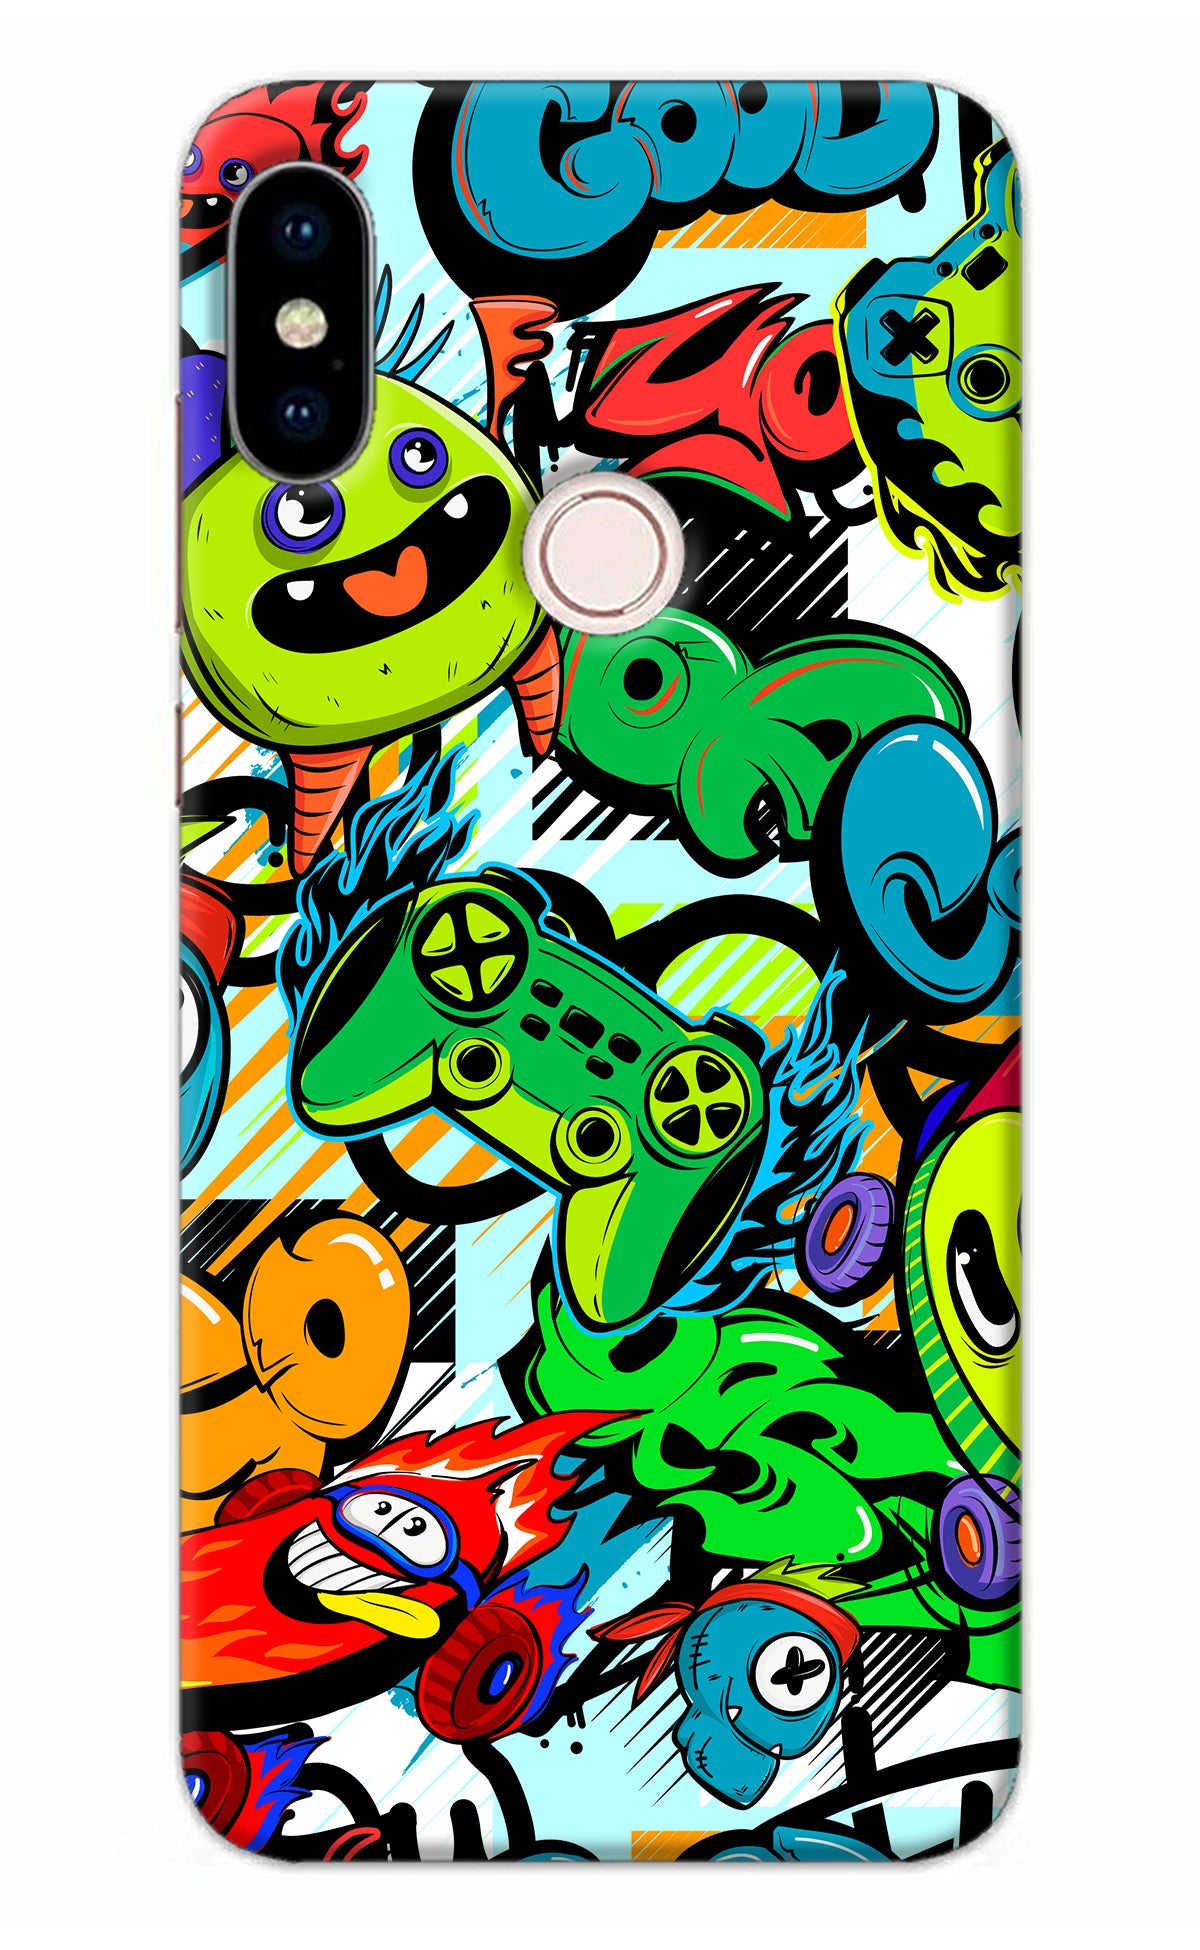 Game Doodle Redmi Note 5 Pro Back Cover